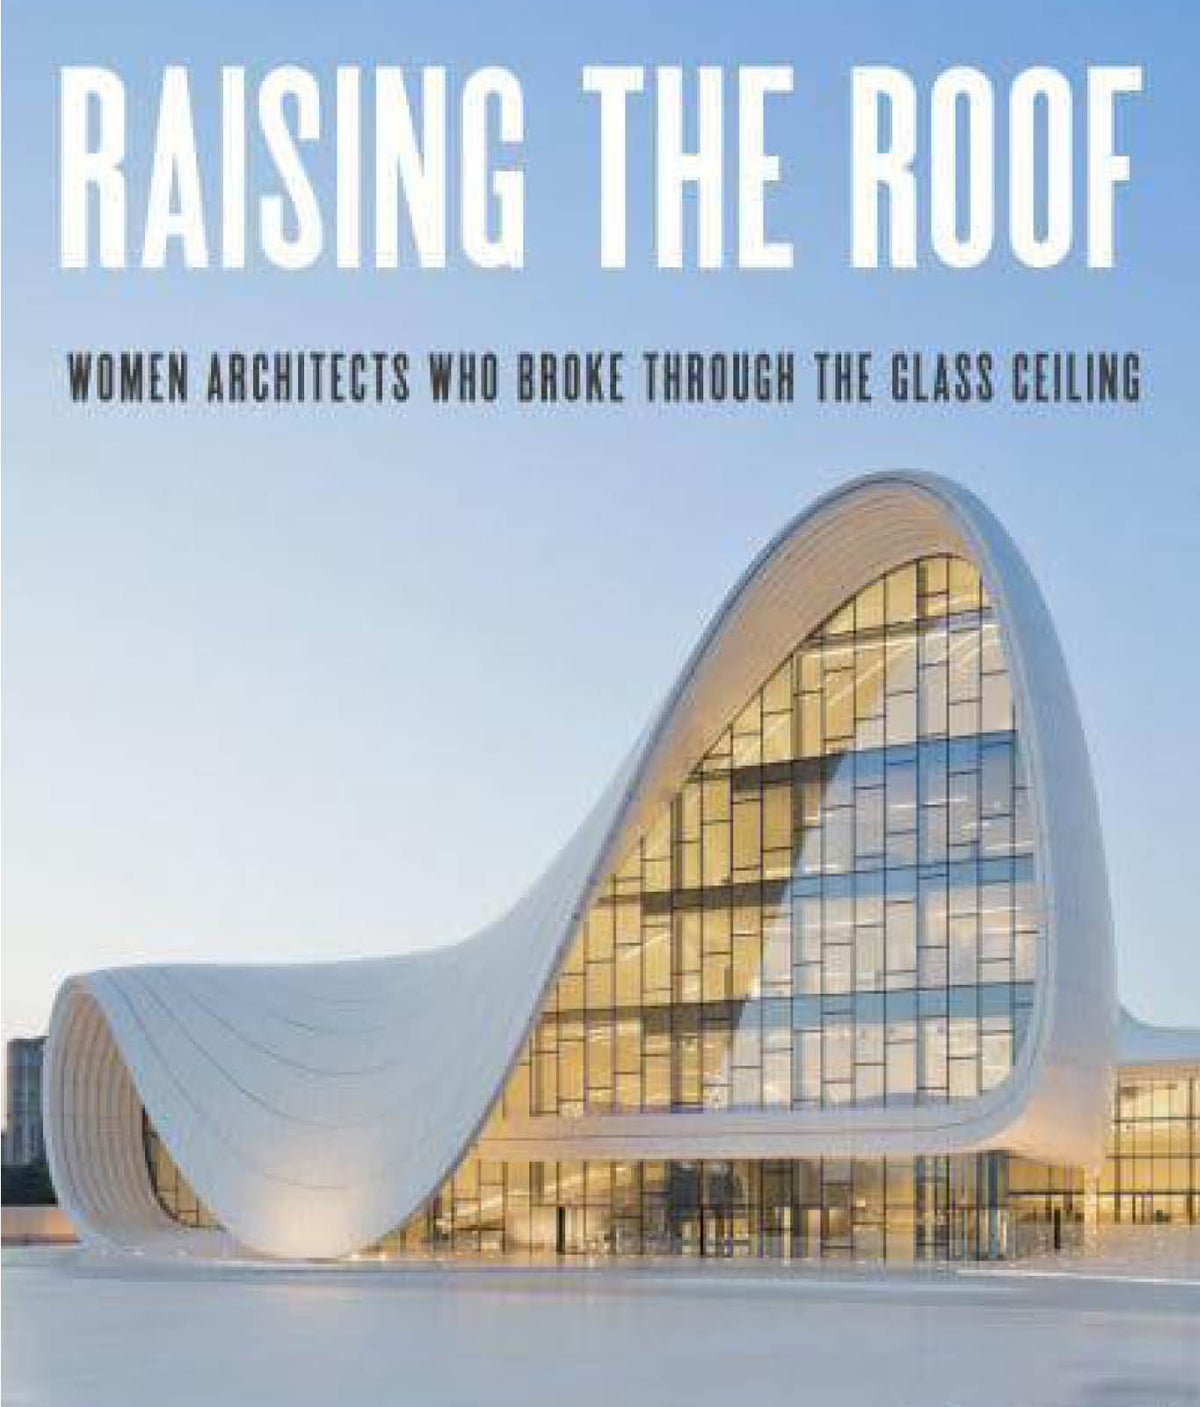 Raising the Roof: Women Architects Who Broke Through the Glass Ceiling by Agata Toromanoff